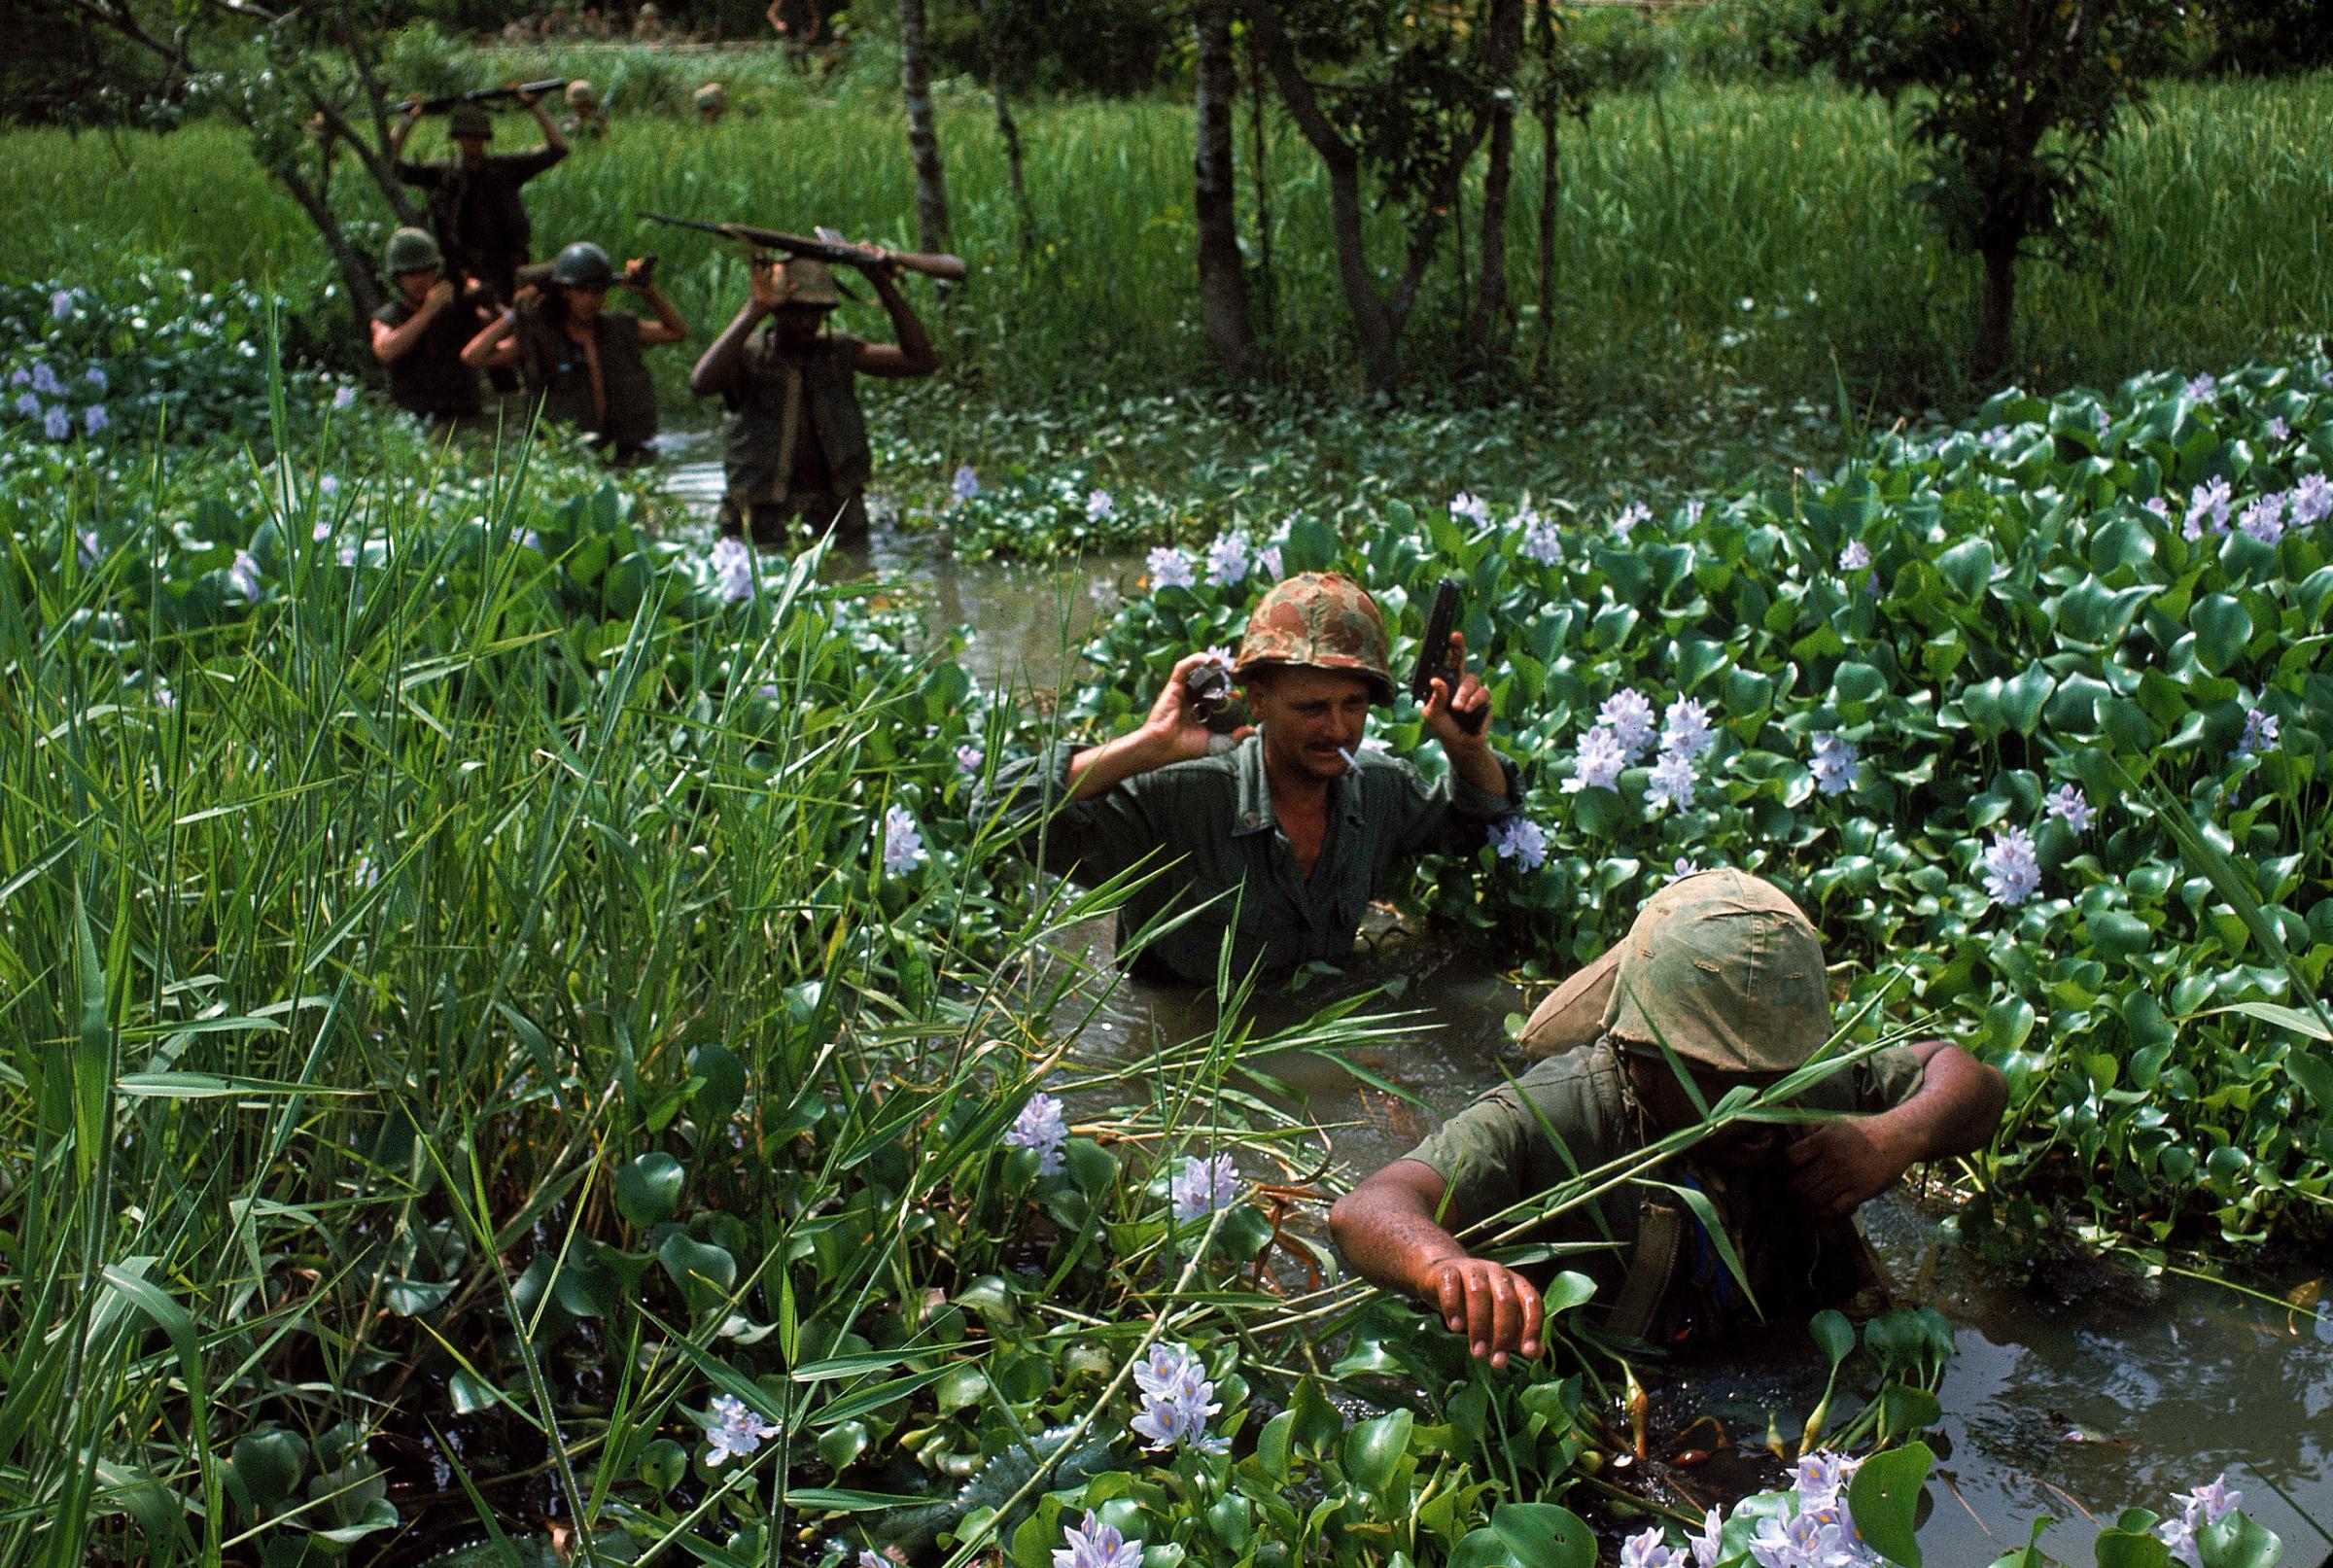 American soldiers wade through marshy area during the Vietnam War, 1965.